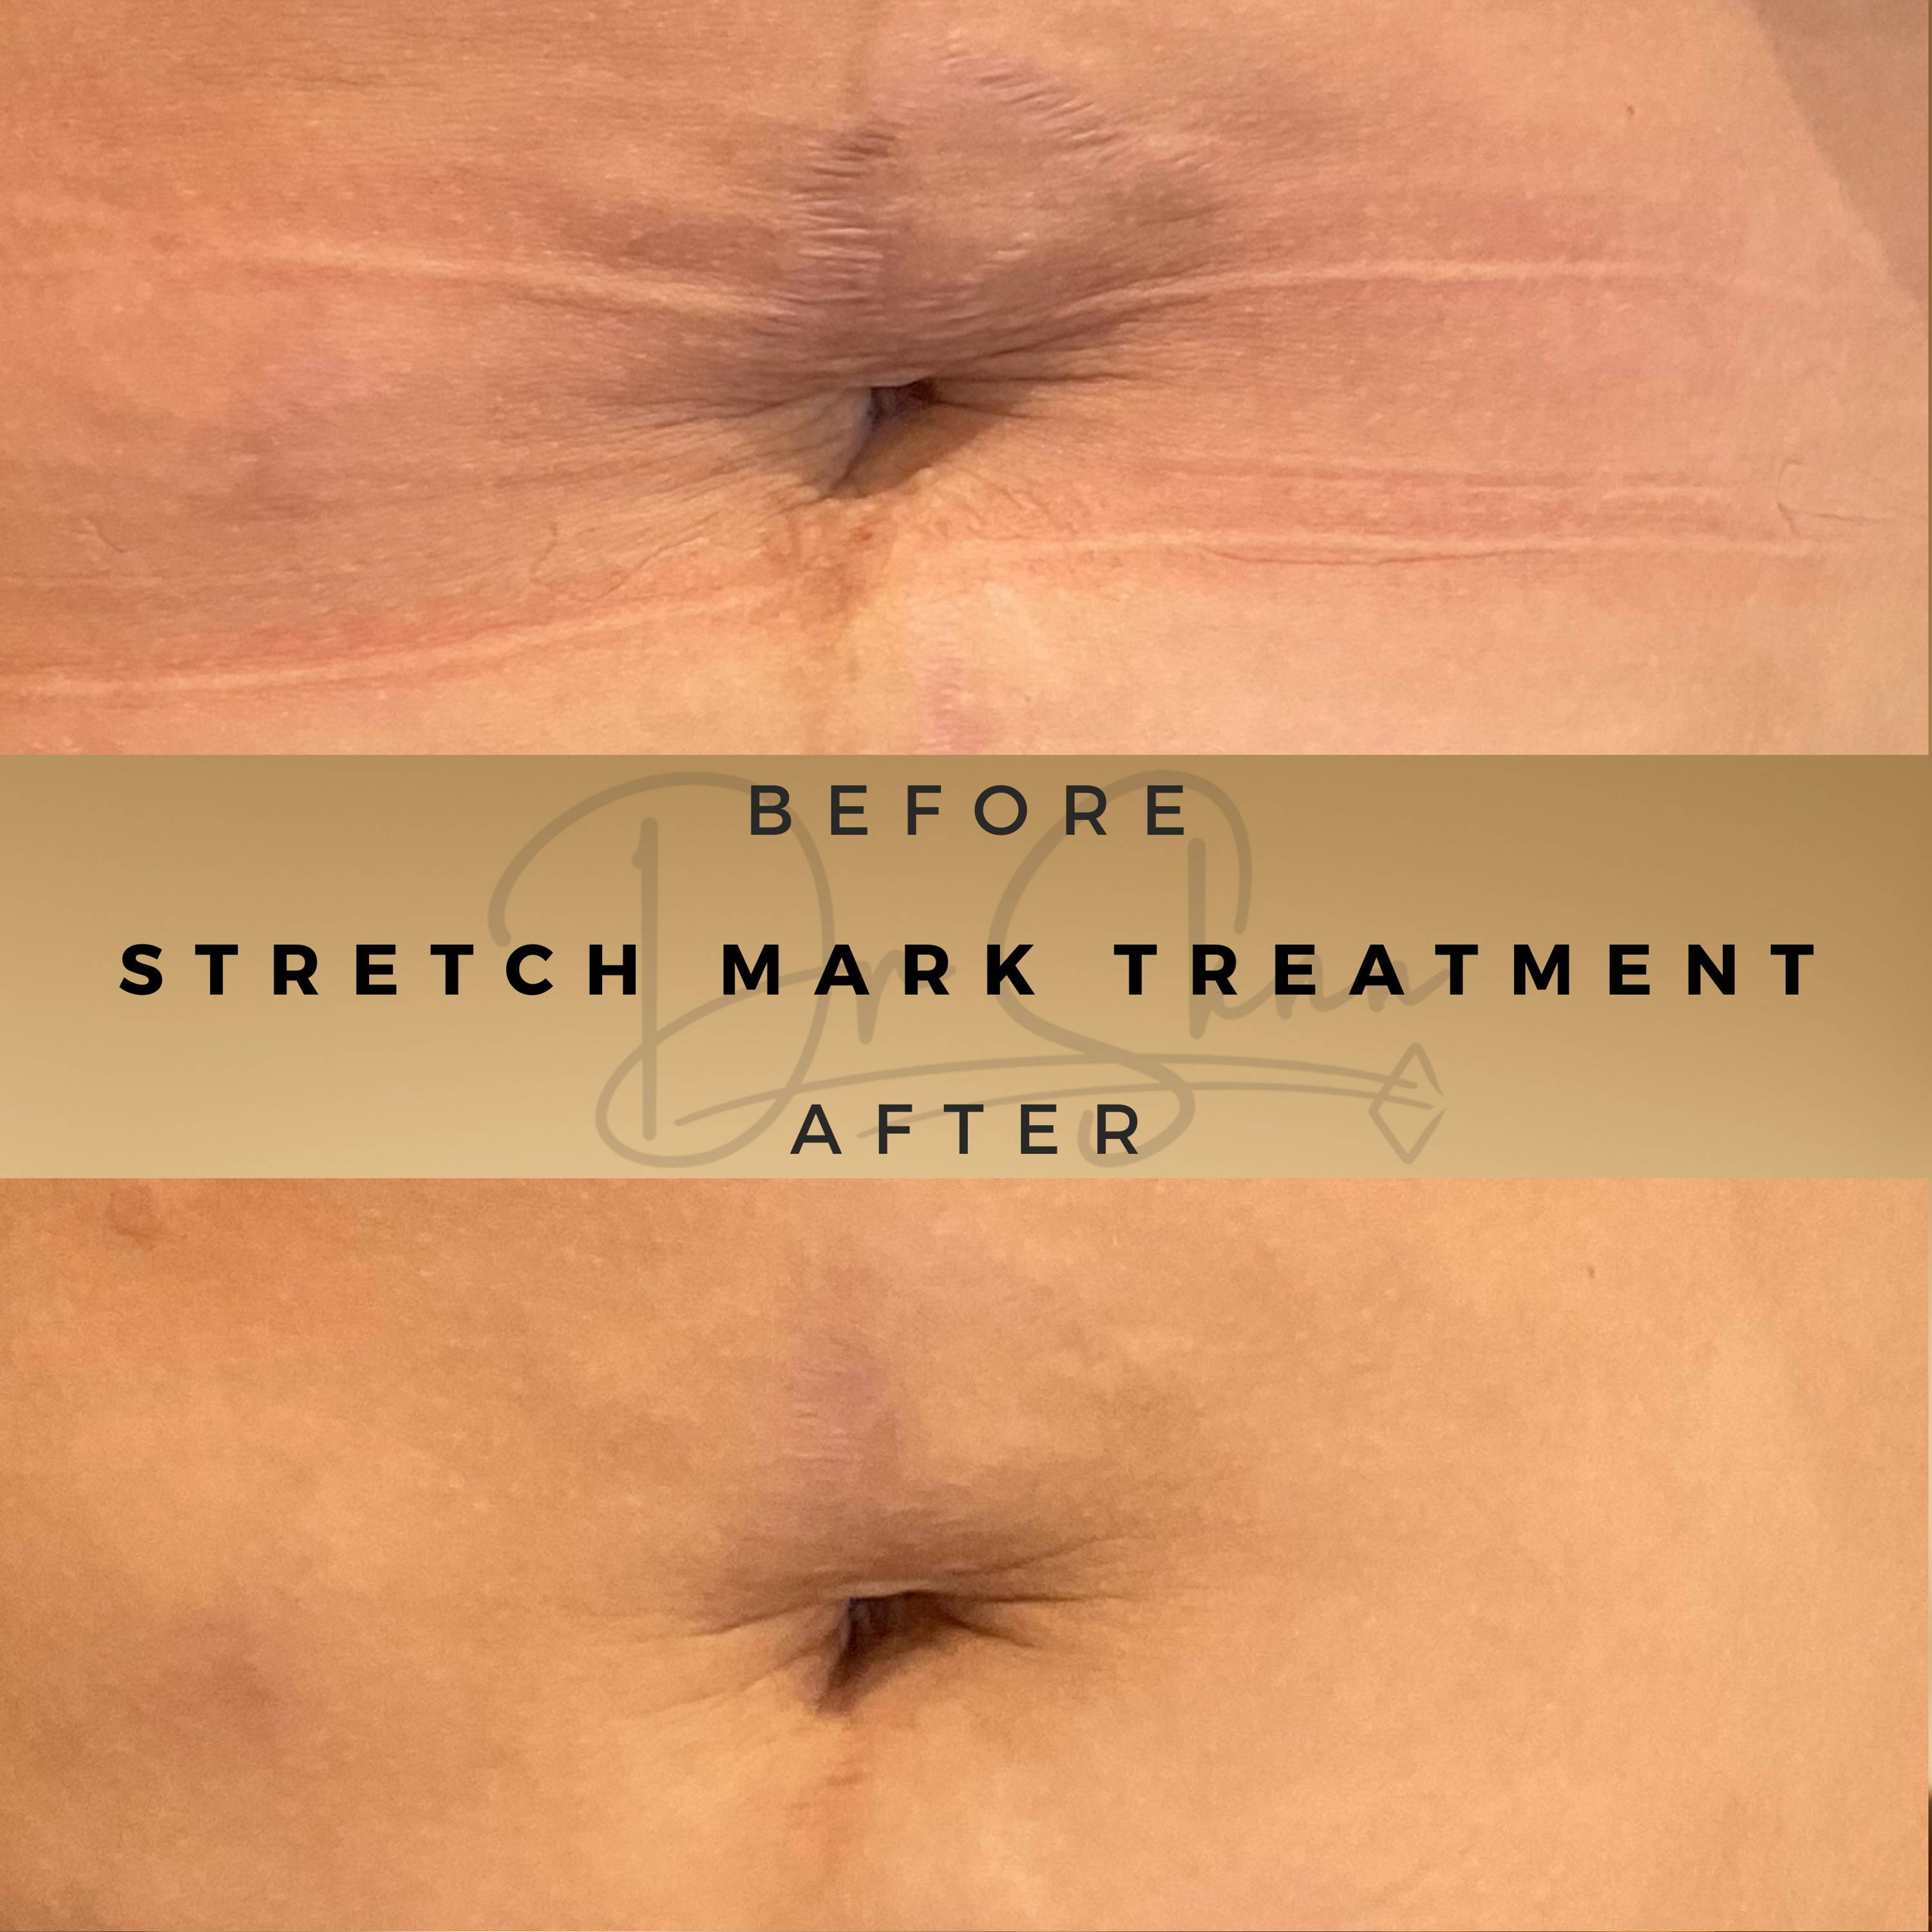 Stretch Mark Treatment Wilmslow Before & After Dr Sknn